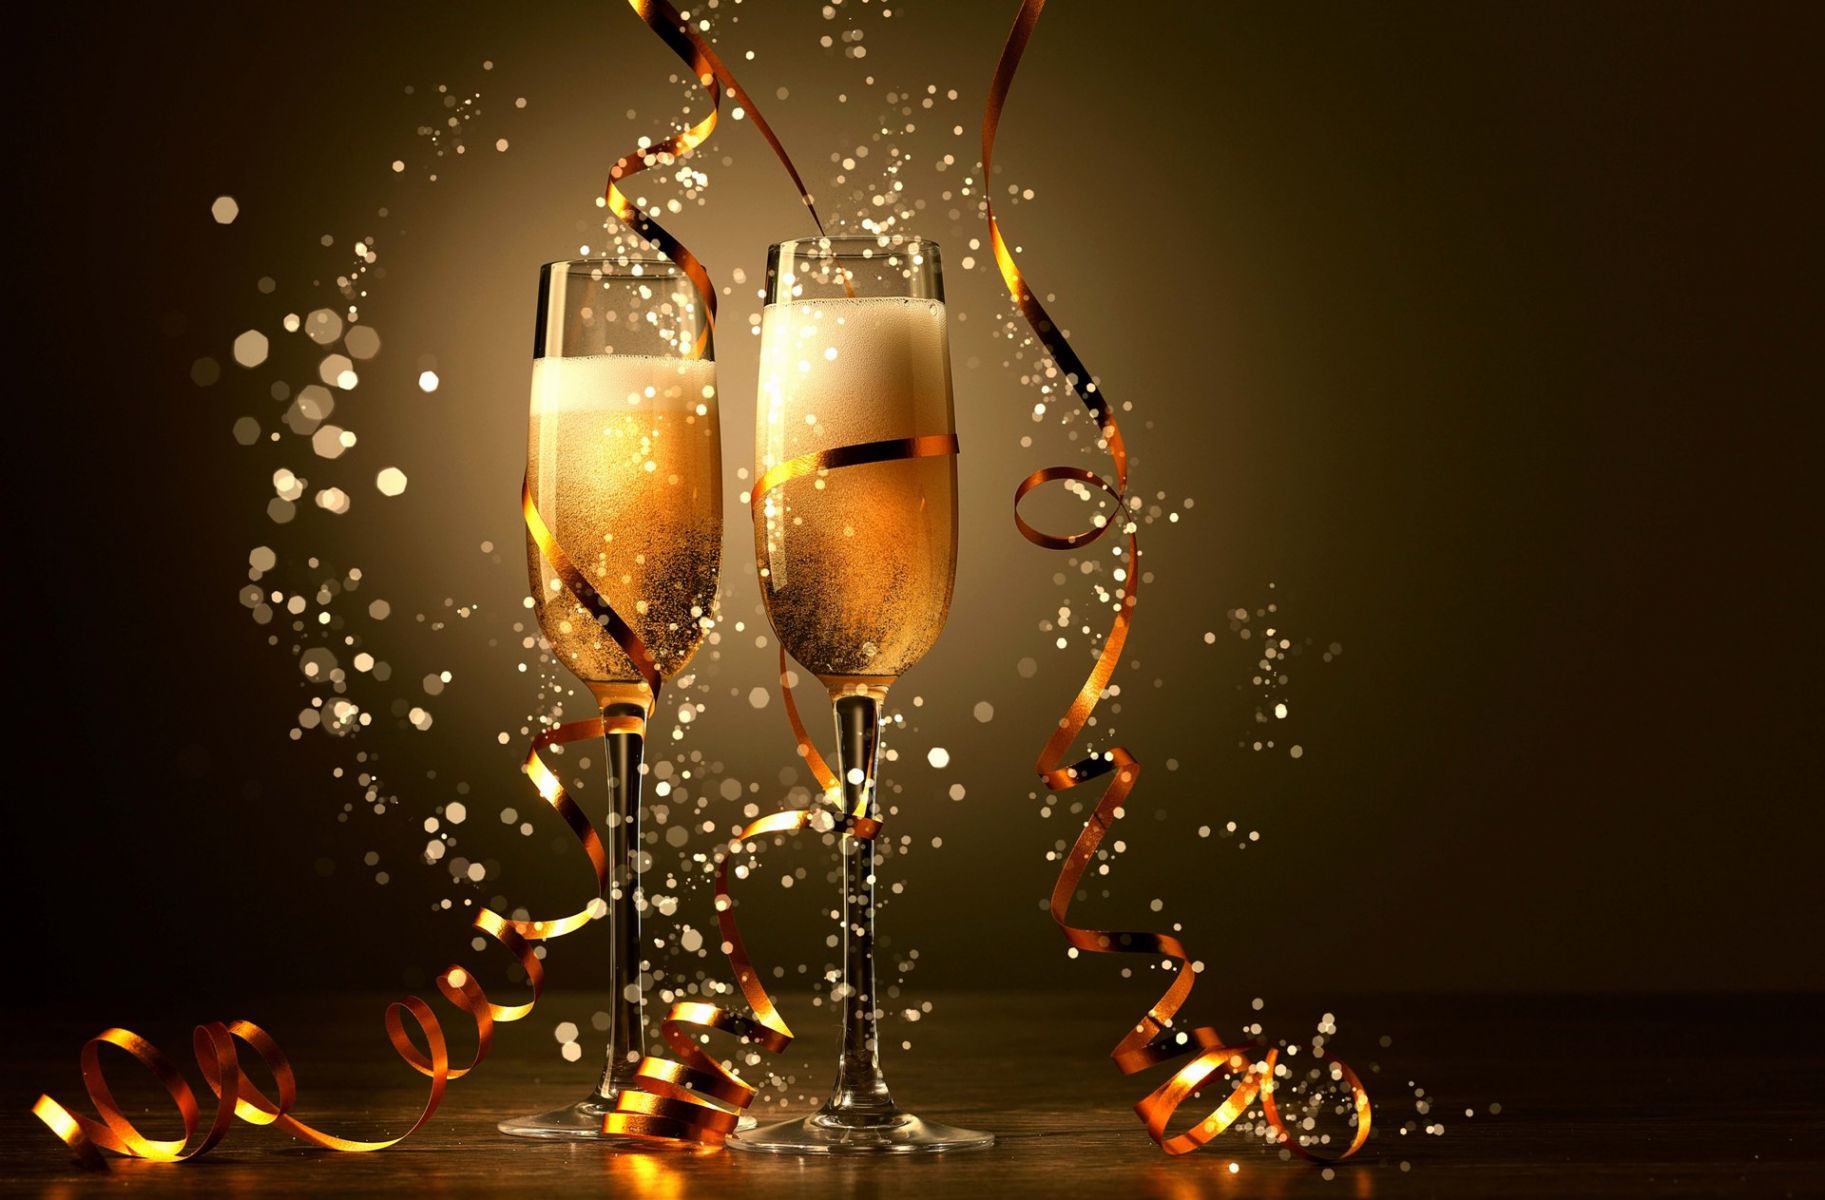 Merry Christmas Wishes 9 Wallpaper - New Year Champagne Glasses - HD Wallpaper 